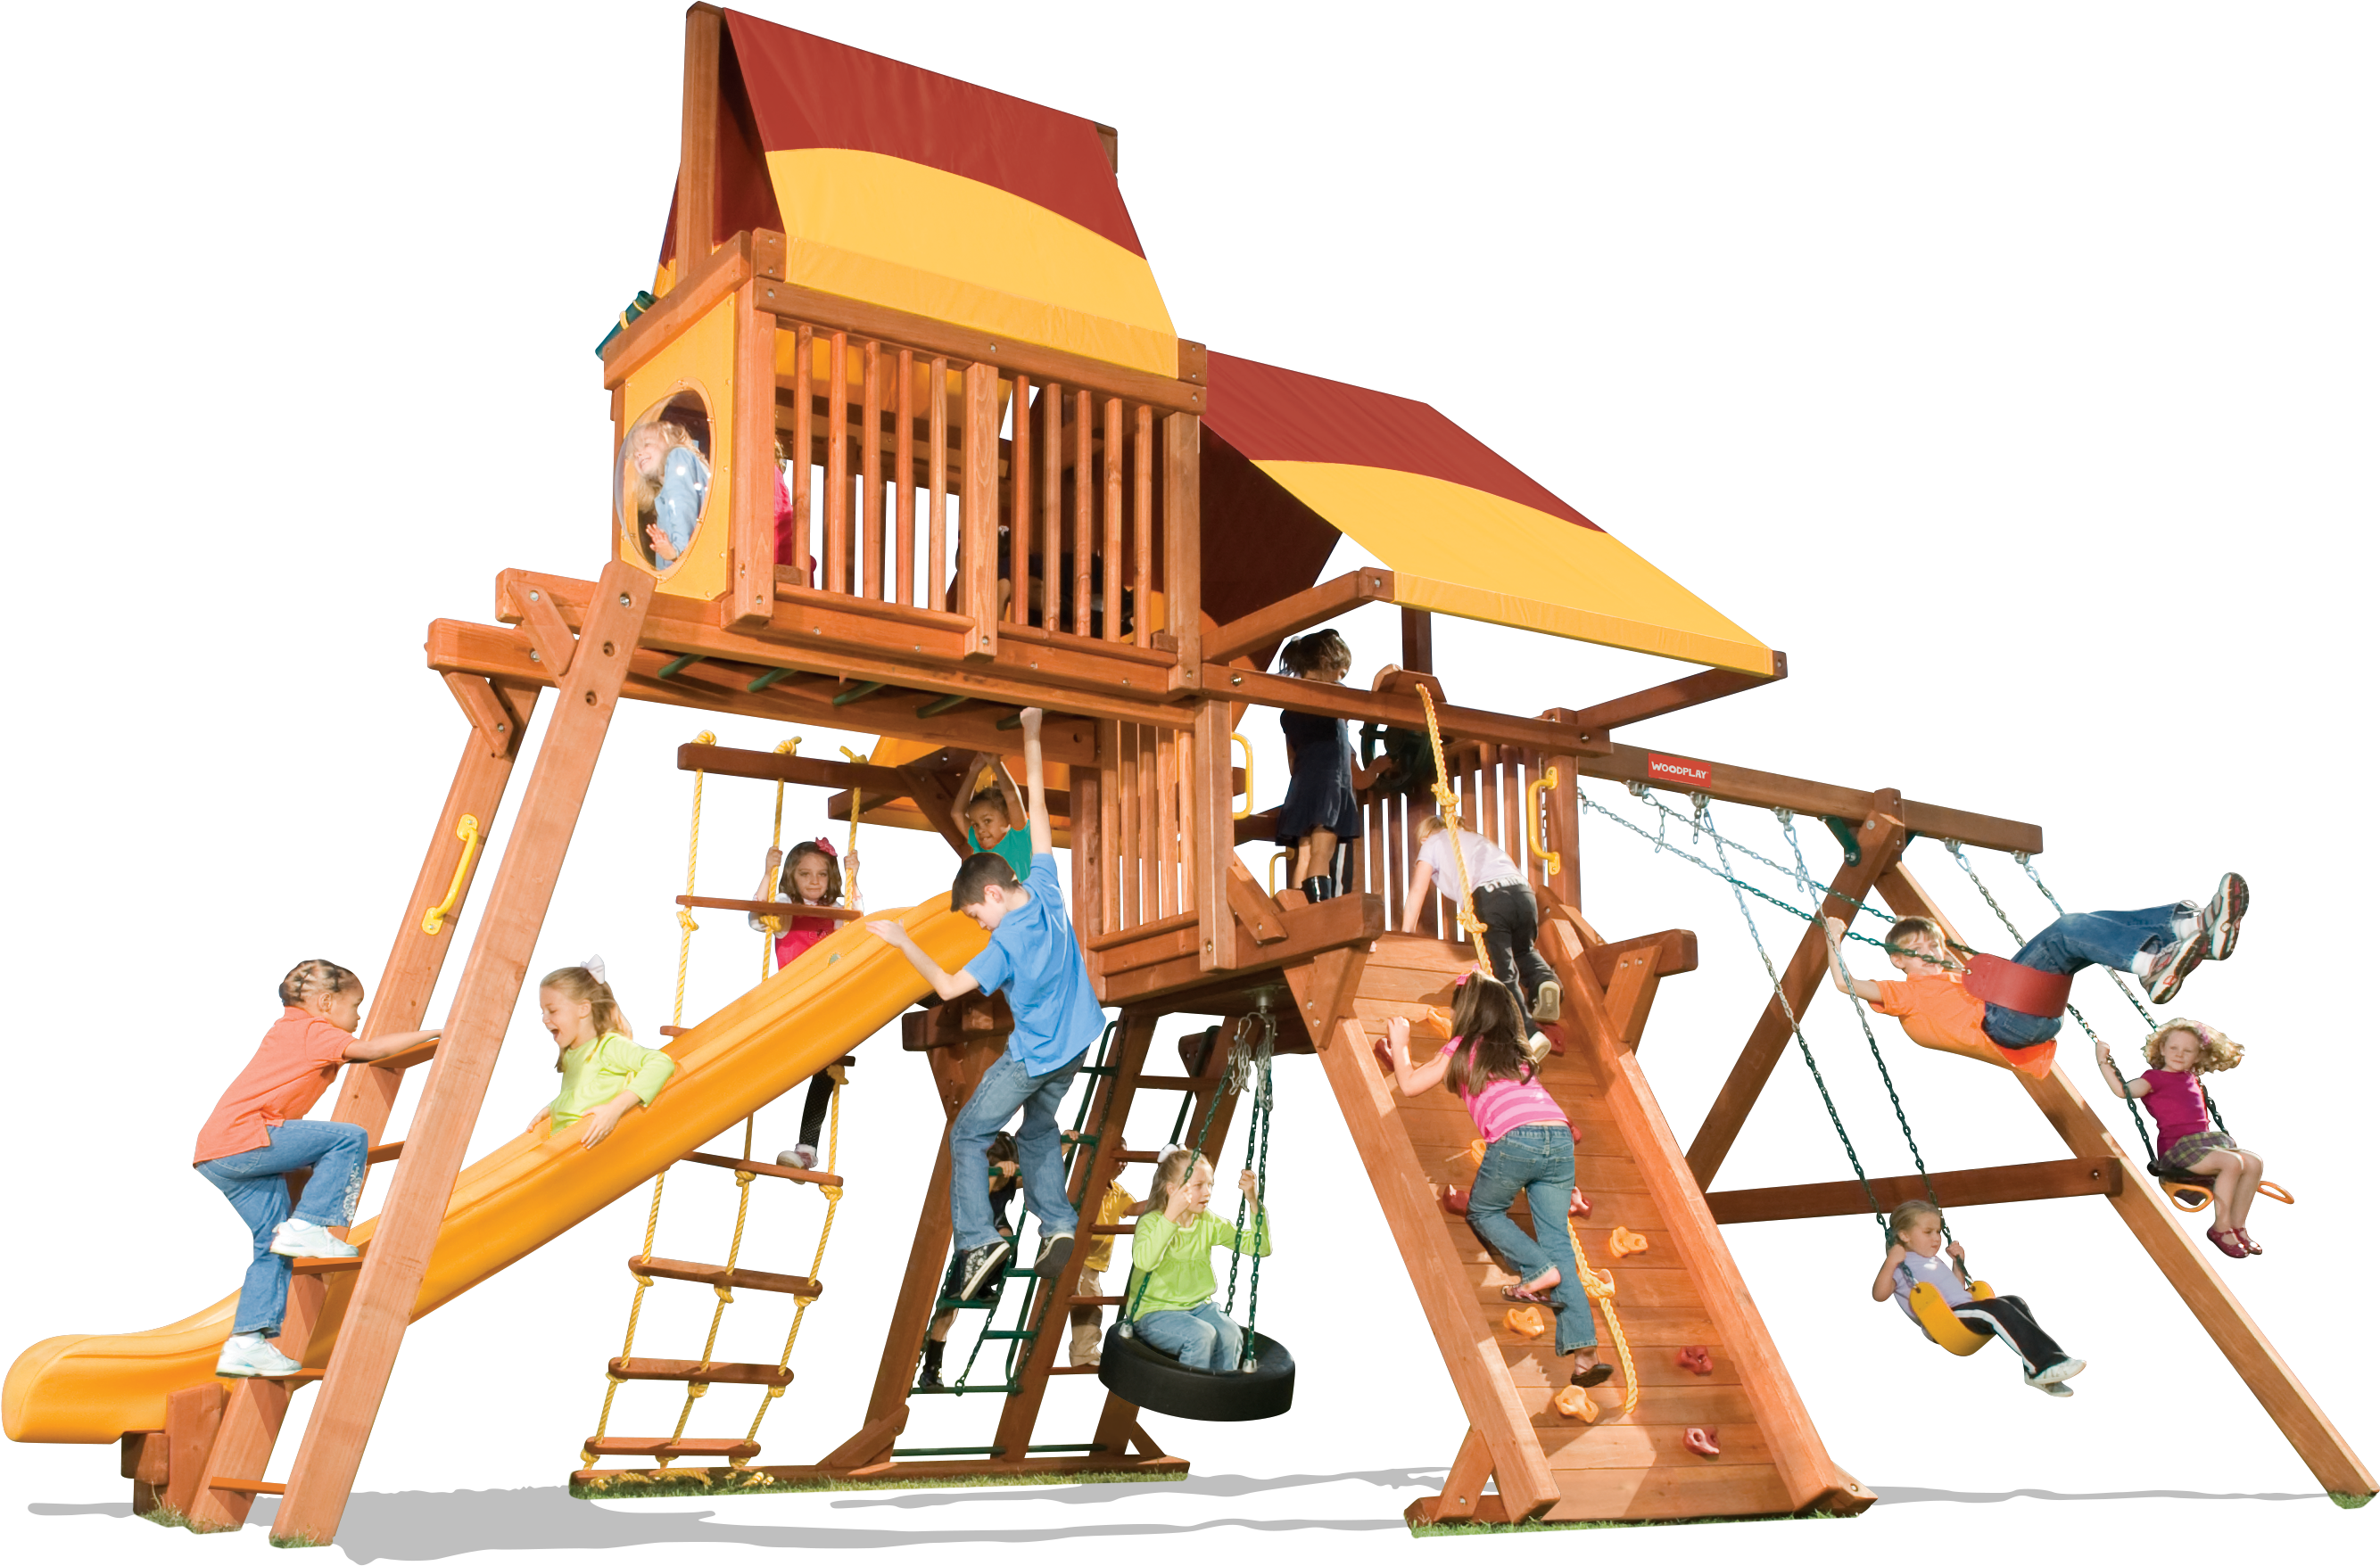 Product Categories - Playground Slide (2748x1833)